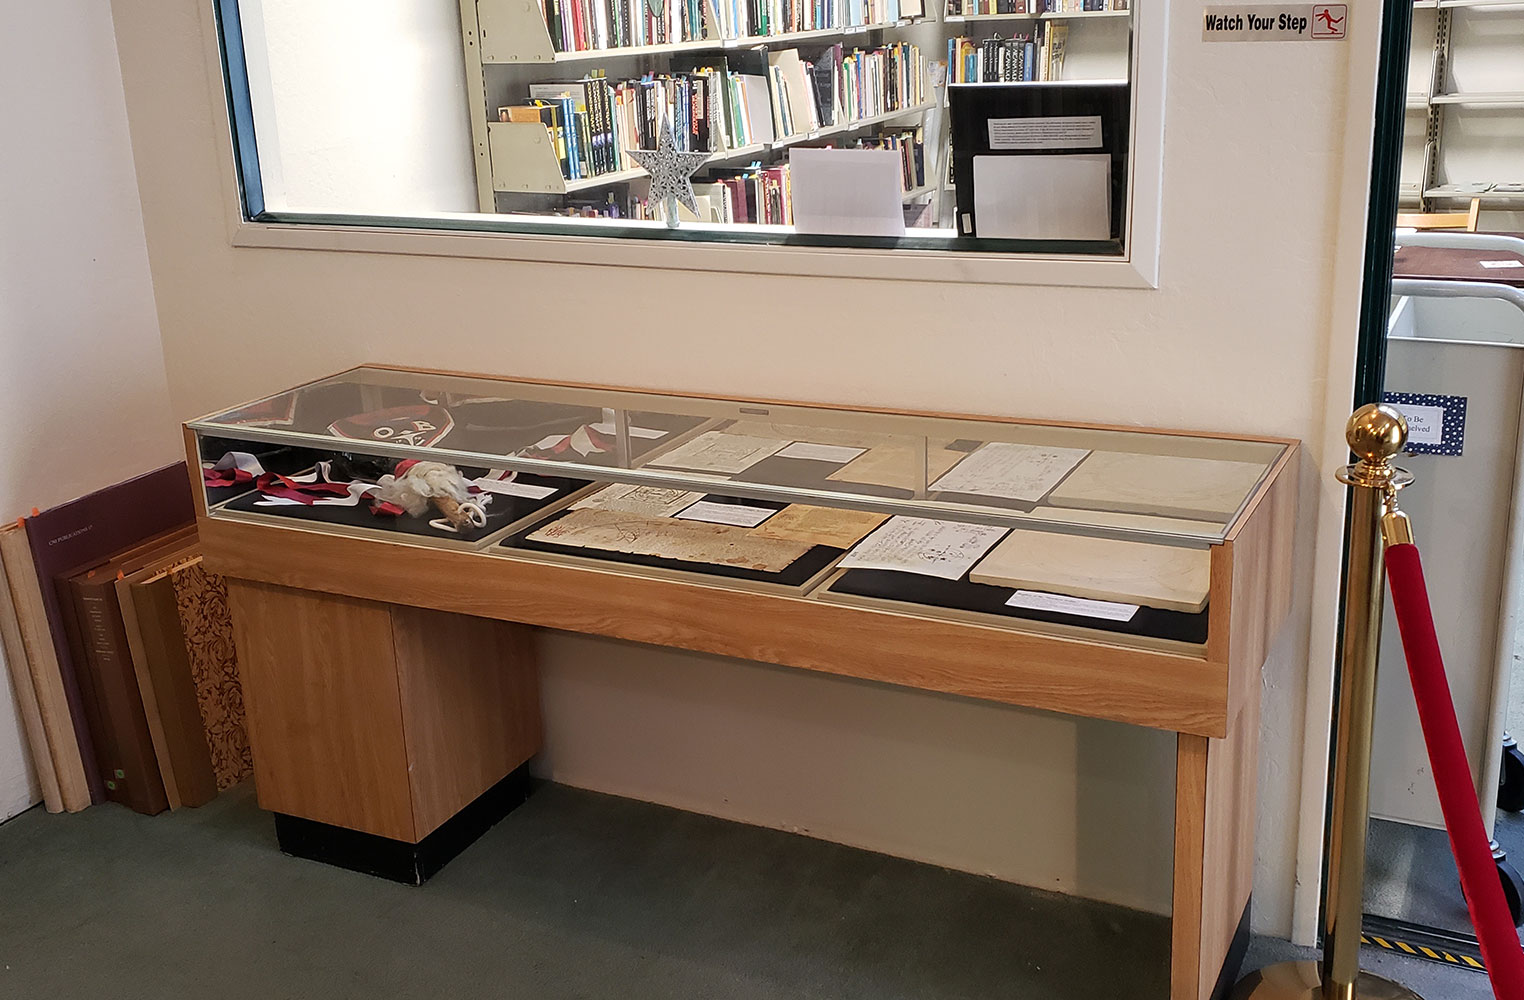 A display case at the Adocentyn Library